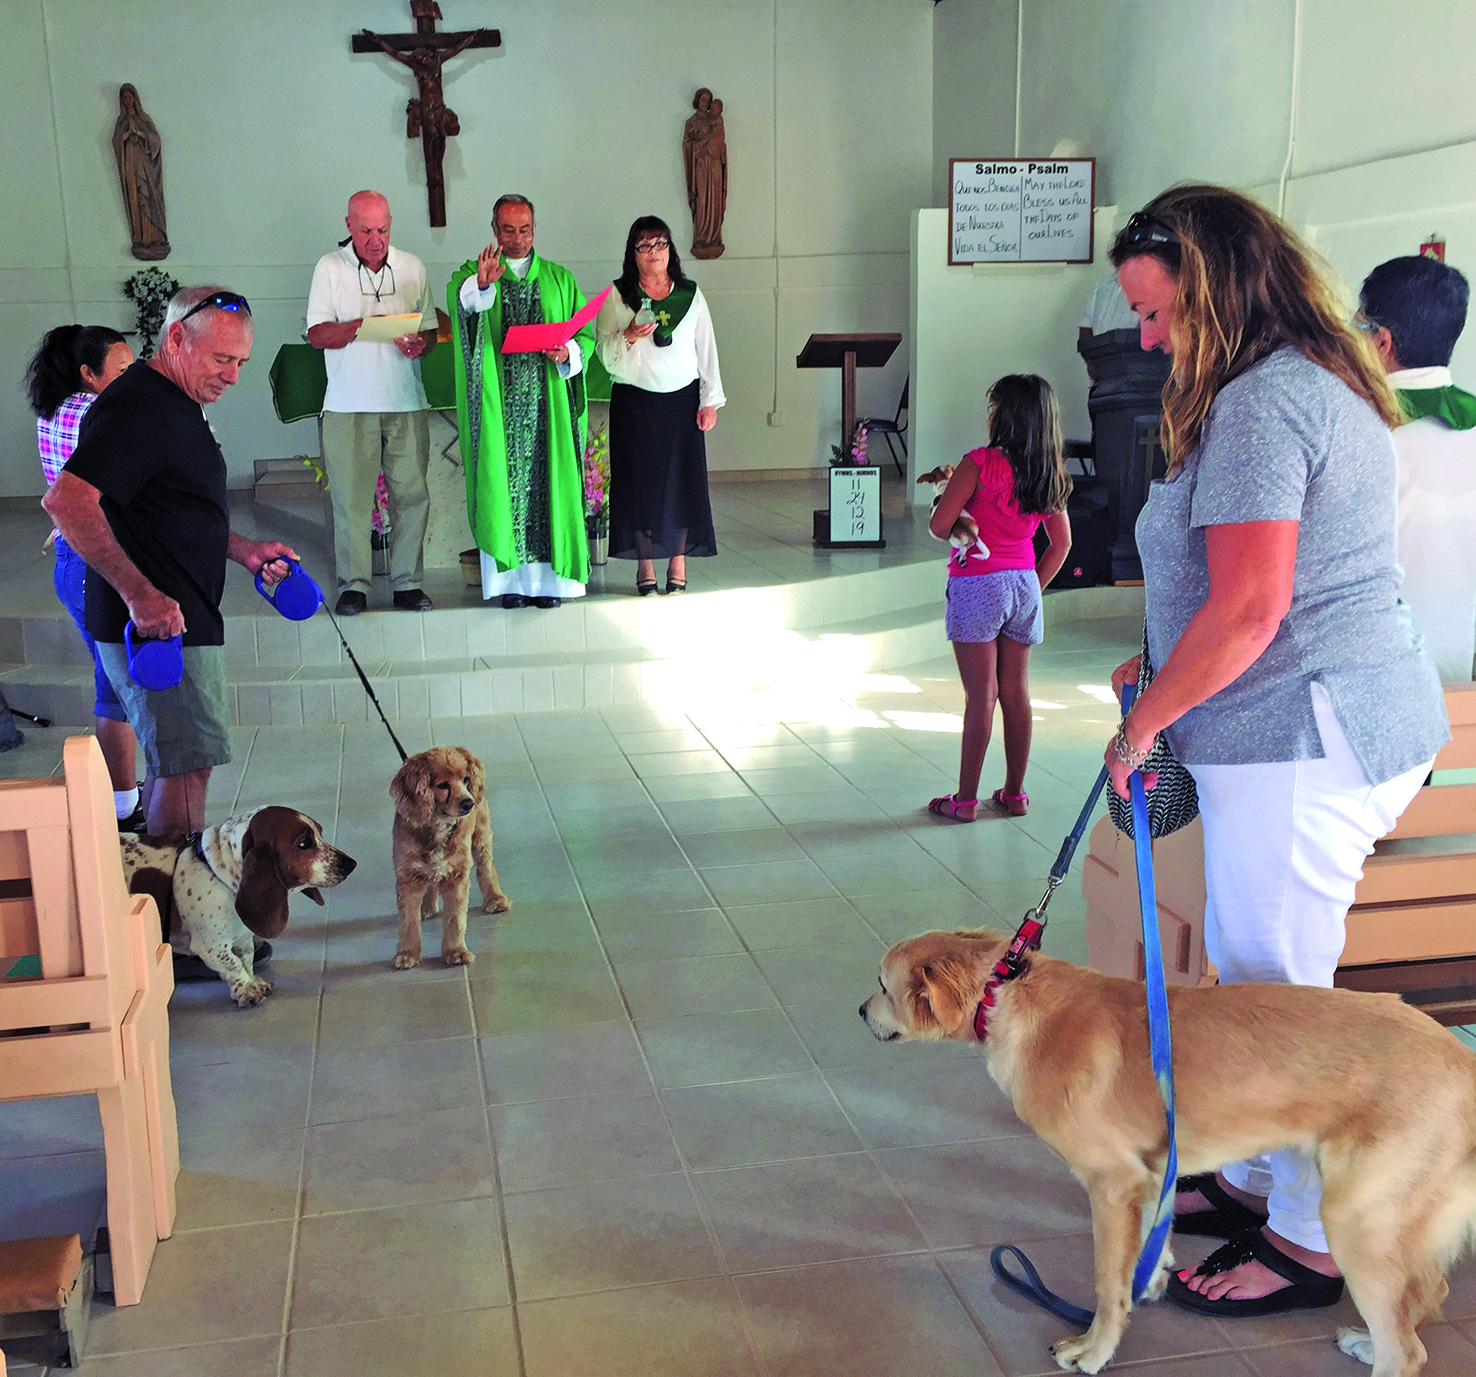 Bring pets to San José for a blessing on Oct. 4